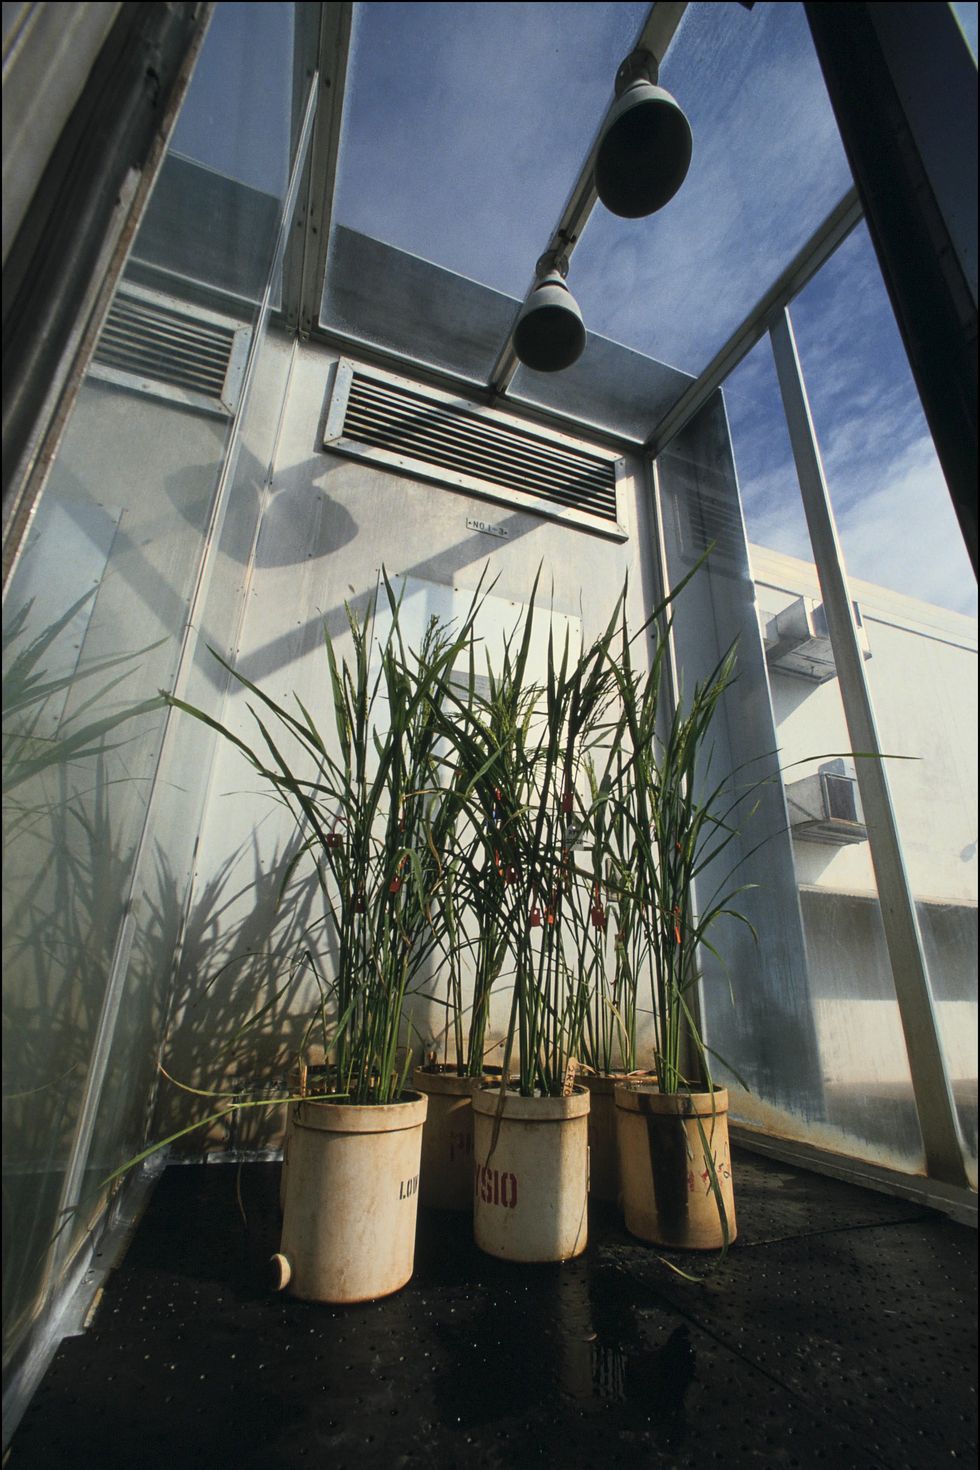 international rice research institute on january 1st, 1991 in philippines